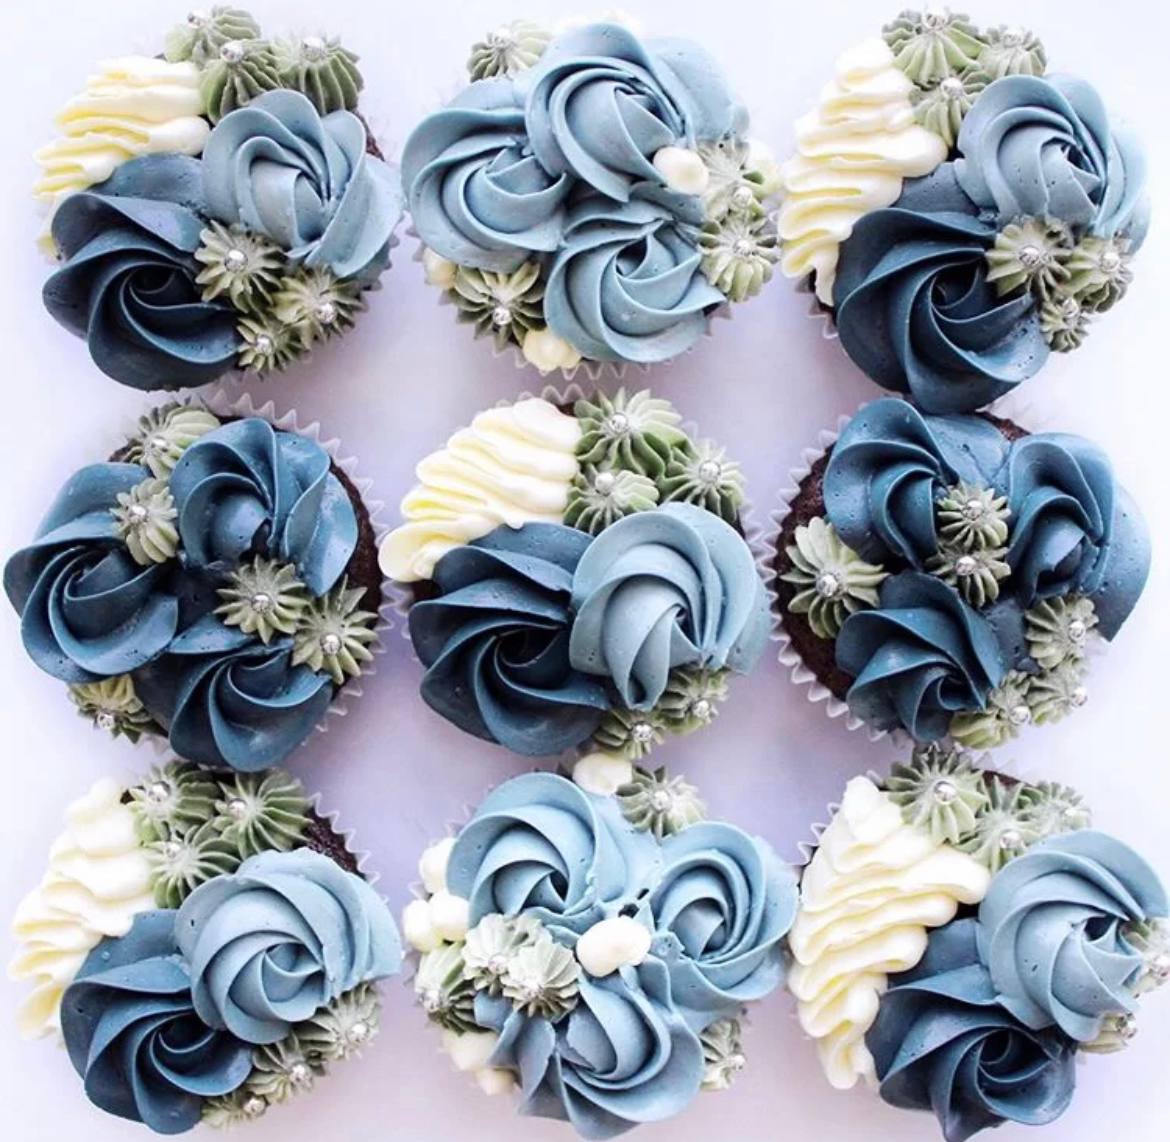 Royal Blue Cupcakes in Singapore